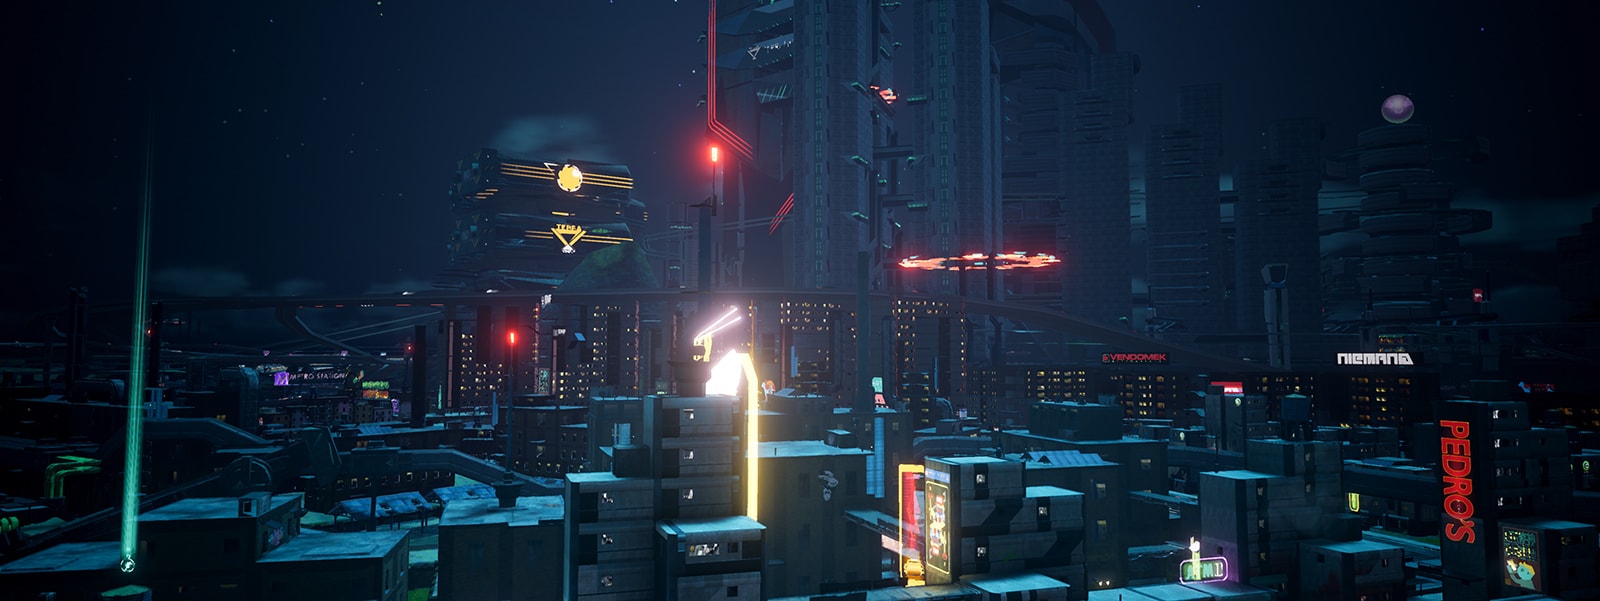 Crackdown 3 screenshot without HDR